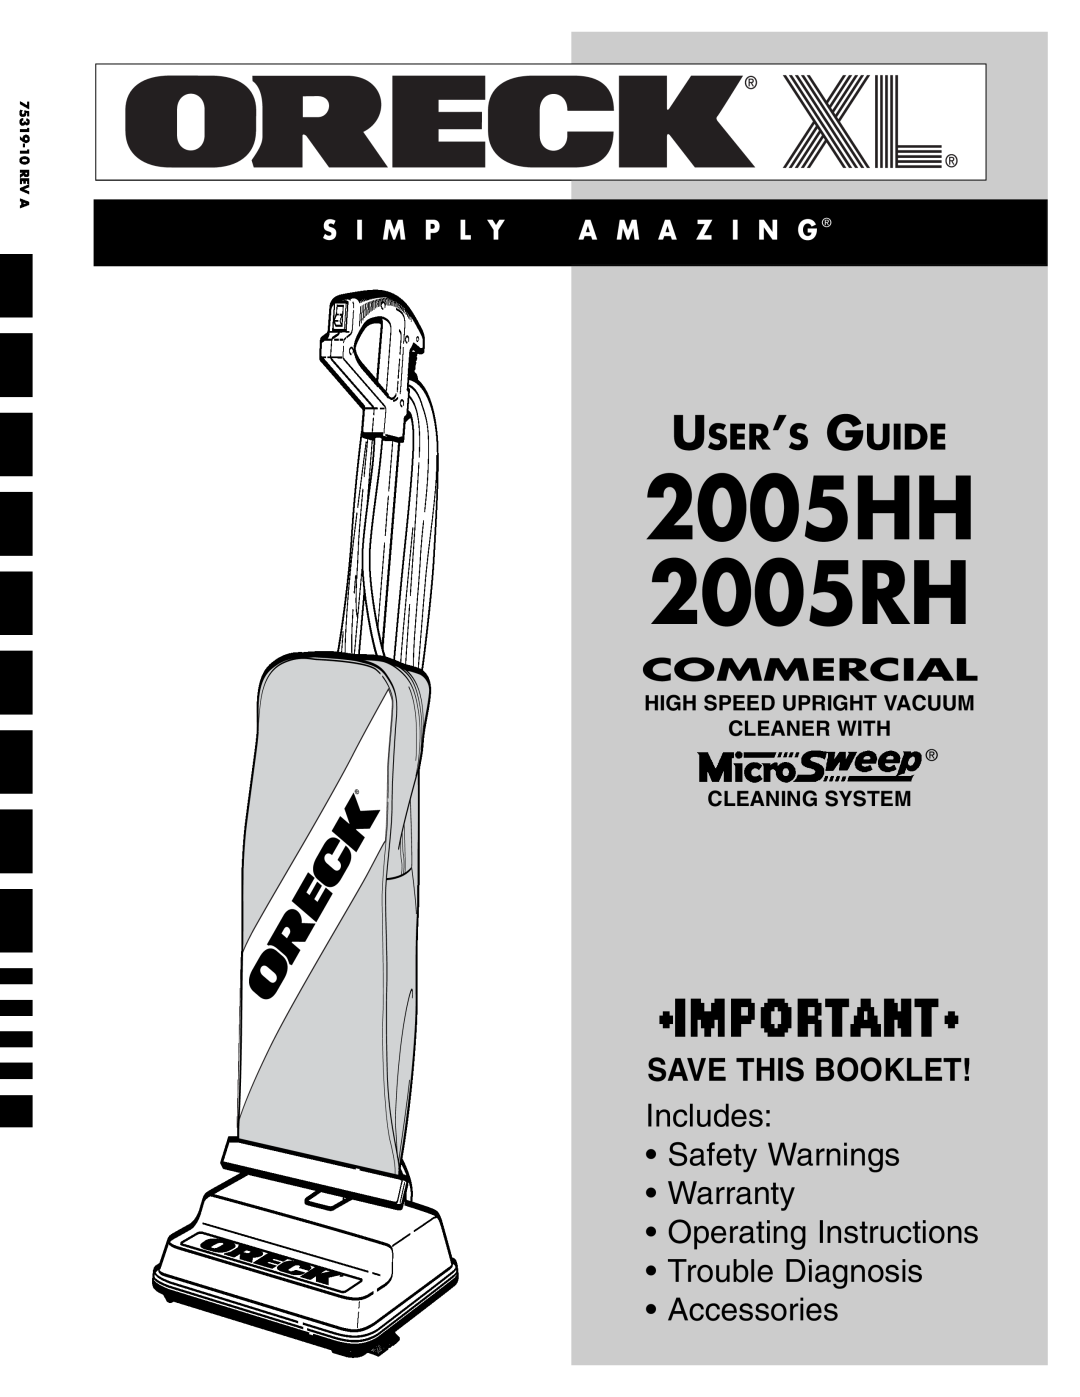 Oreck warranty User’S Guide, High Speed Upright Vacuum Cleaner With, Cleaning System, 2005HH 2005RH, Save This Booklet 